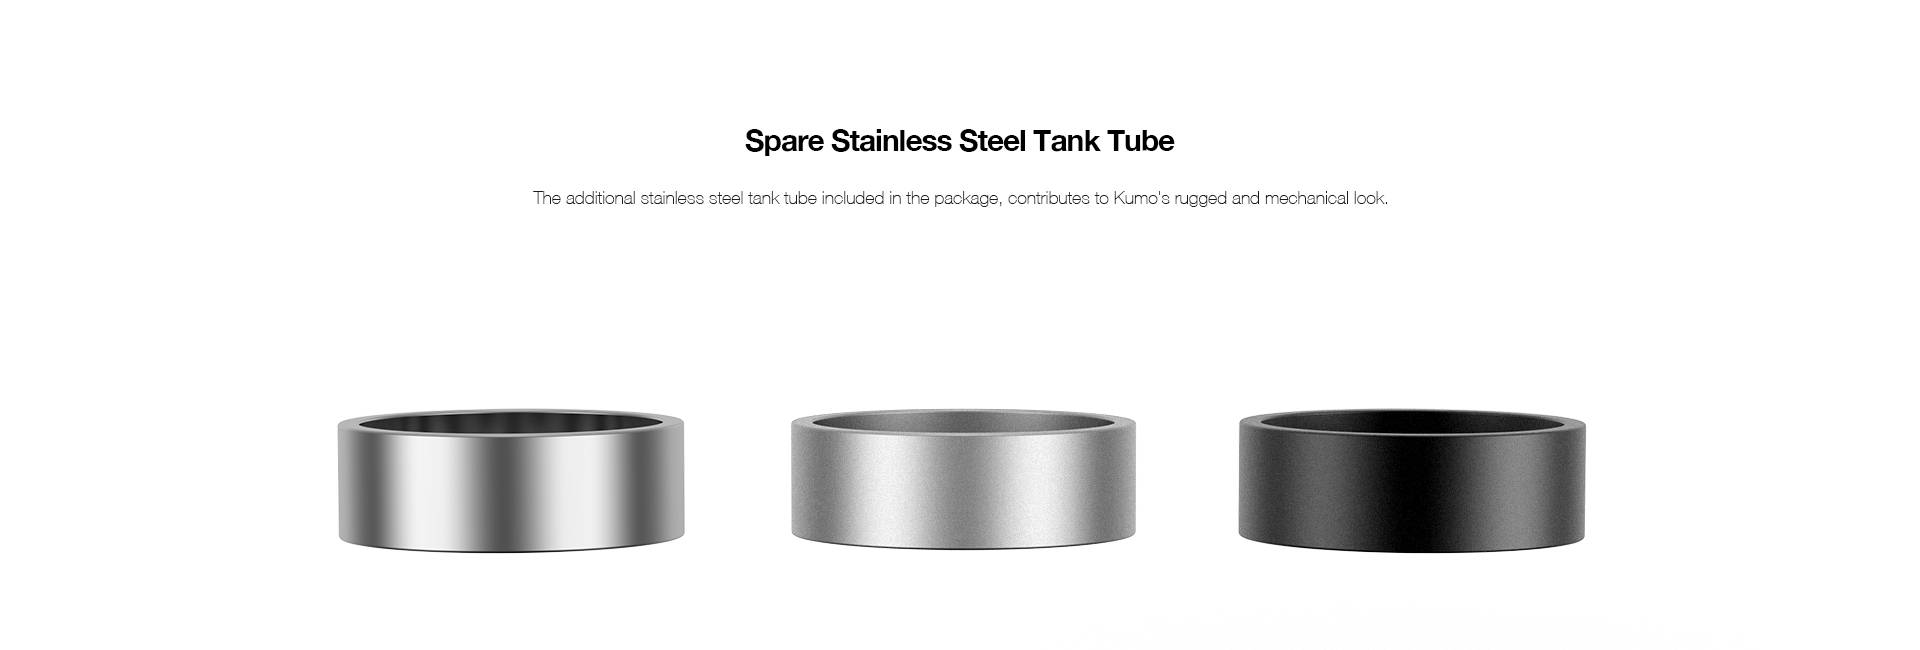 The additional stainless steel tank tube included in the package, contributes to Kumo's rugged and mechanical look.